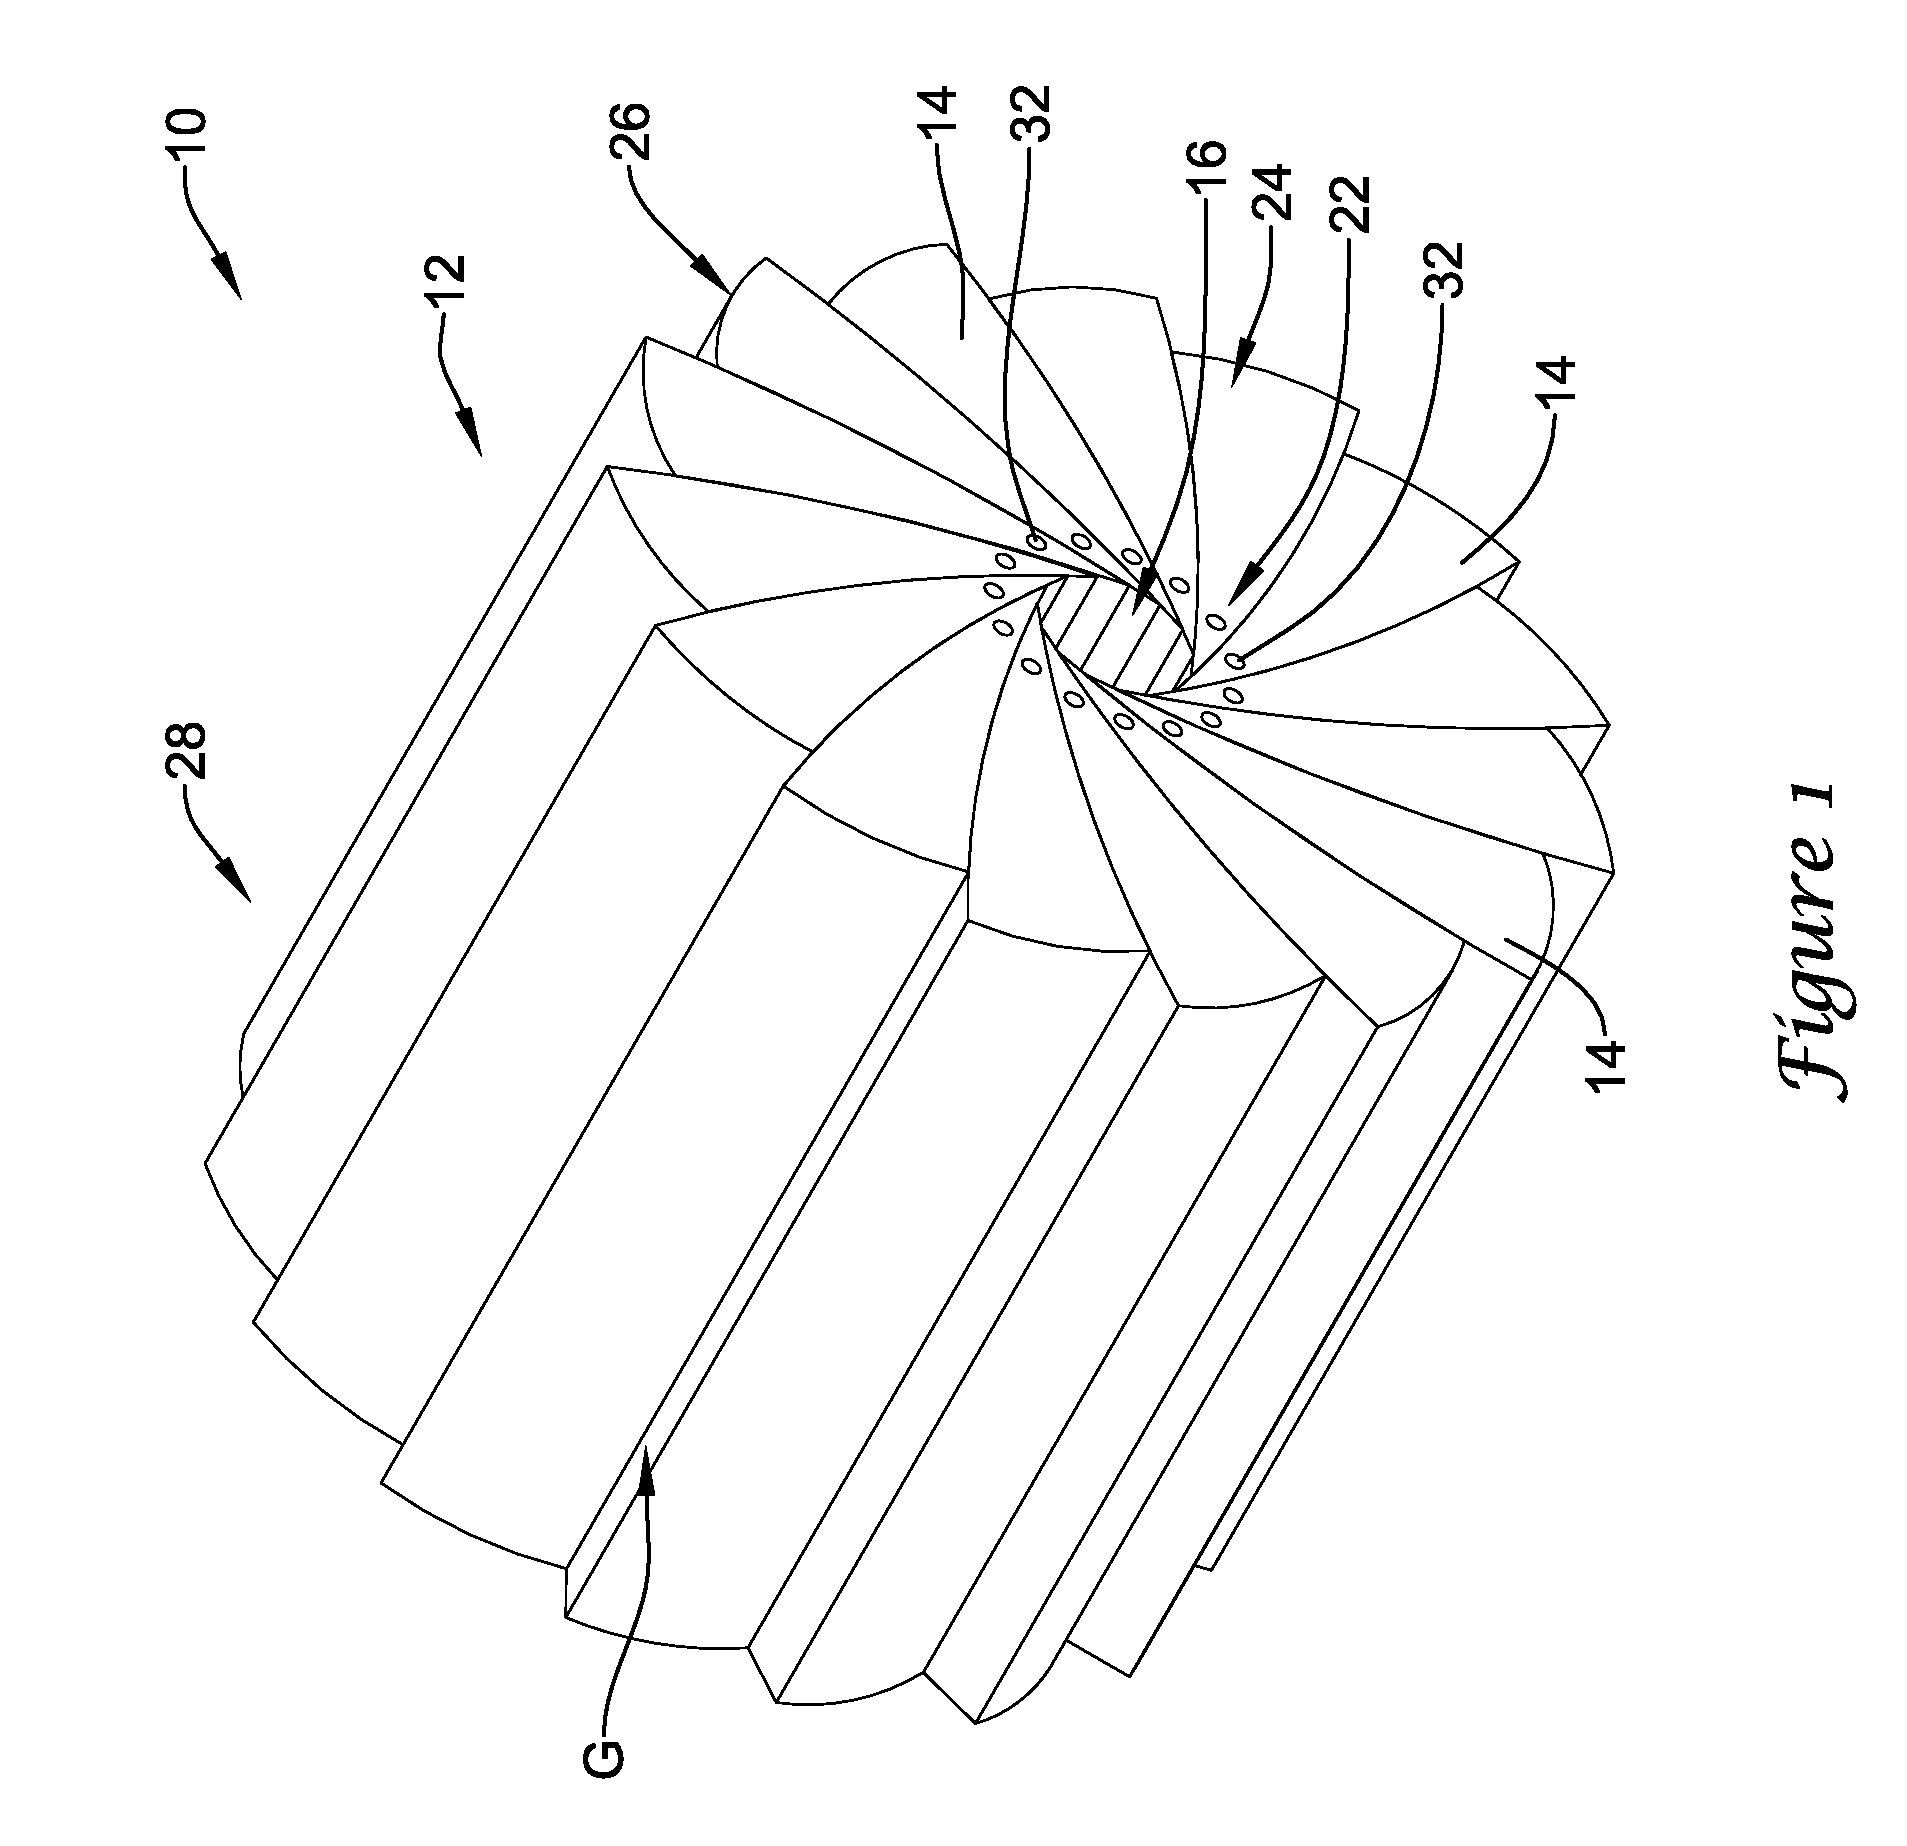 Devices and methods for abluminally coating medical devices